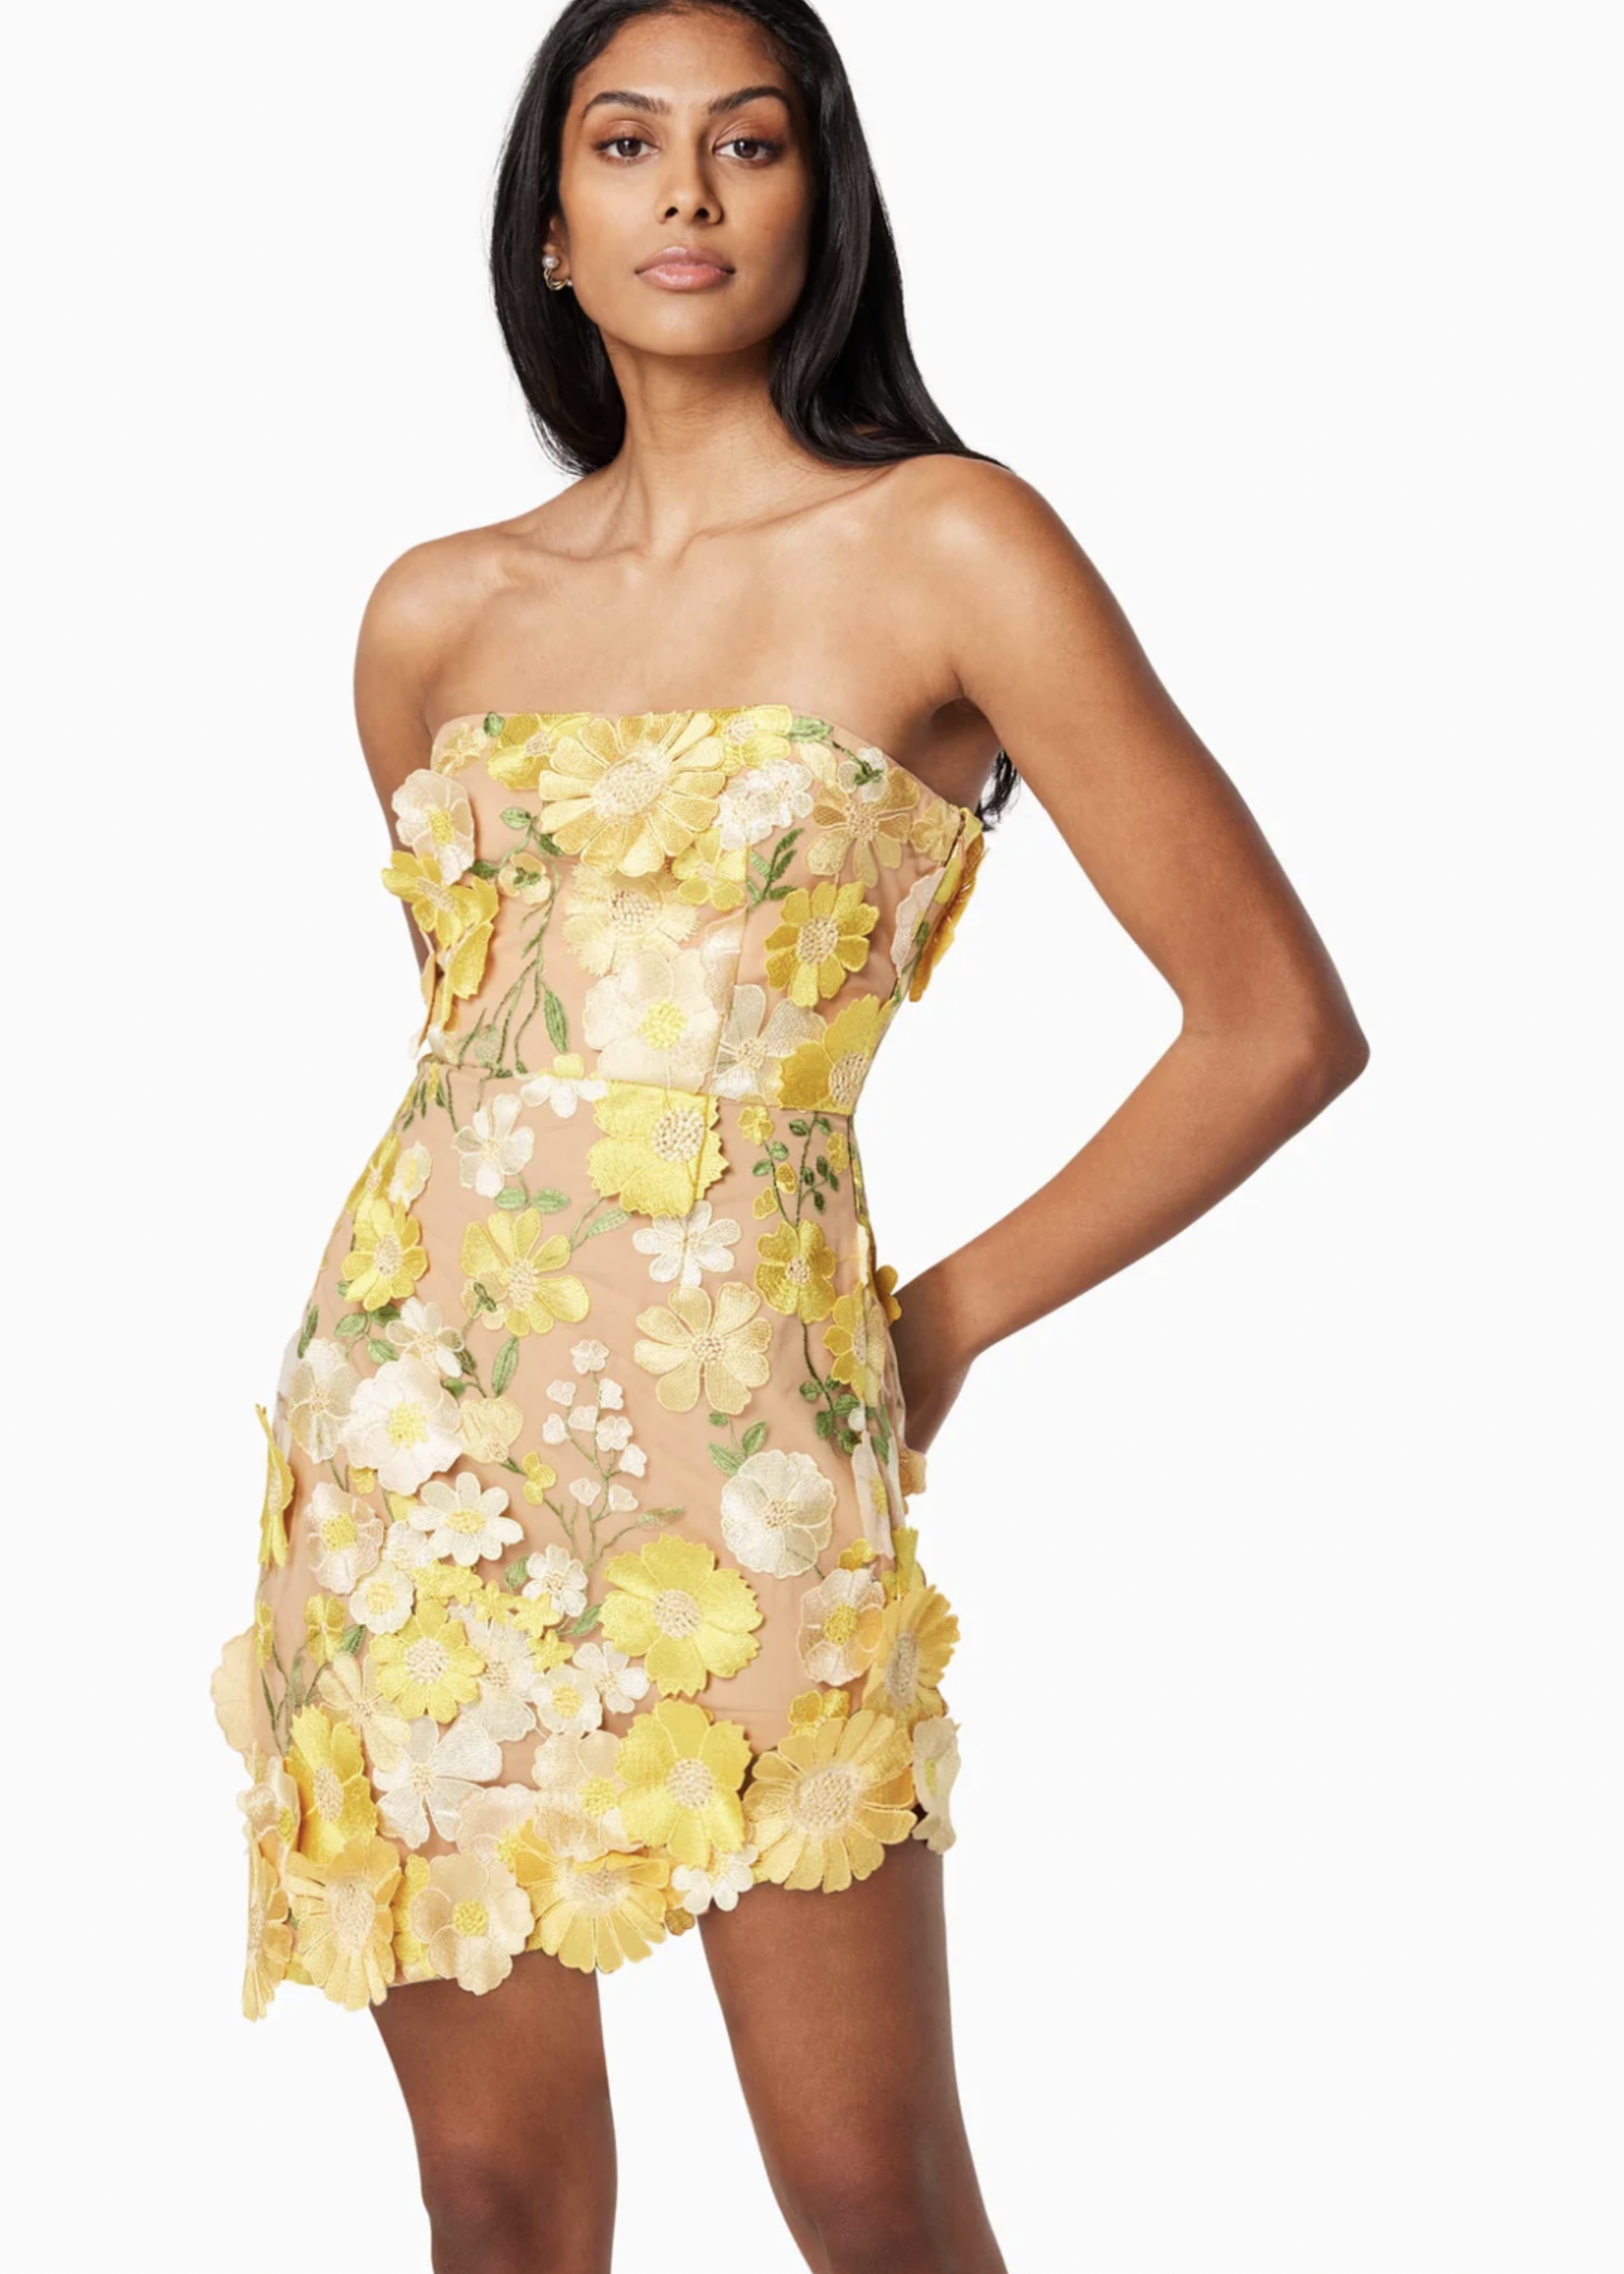 Elitaire Boutique New Age Dress in Yellow